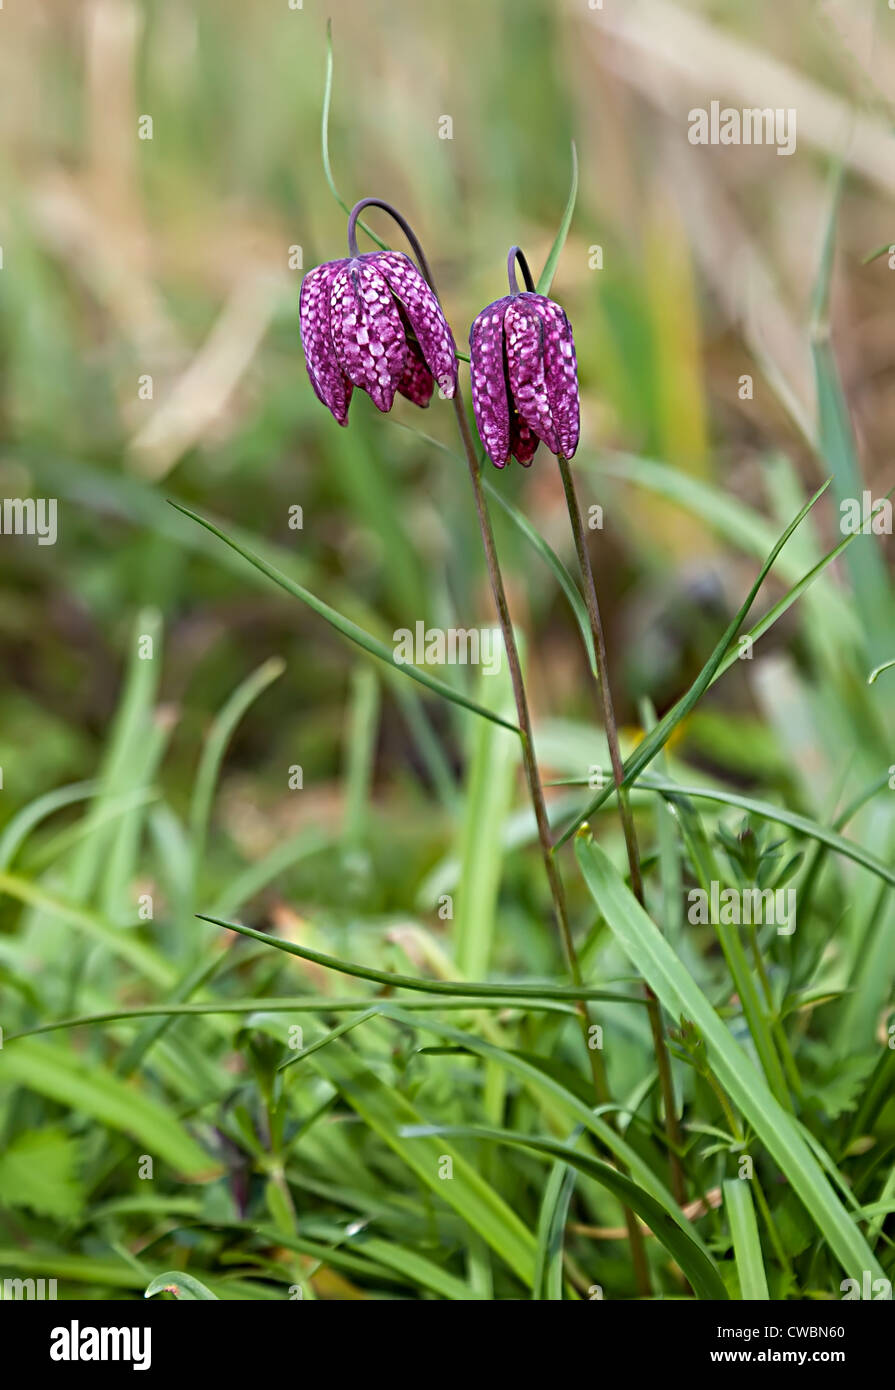 Fritillaria meleagris the Snakes Head Fritillary flower in boggy ground, UK Stock Photo